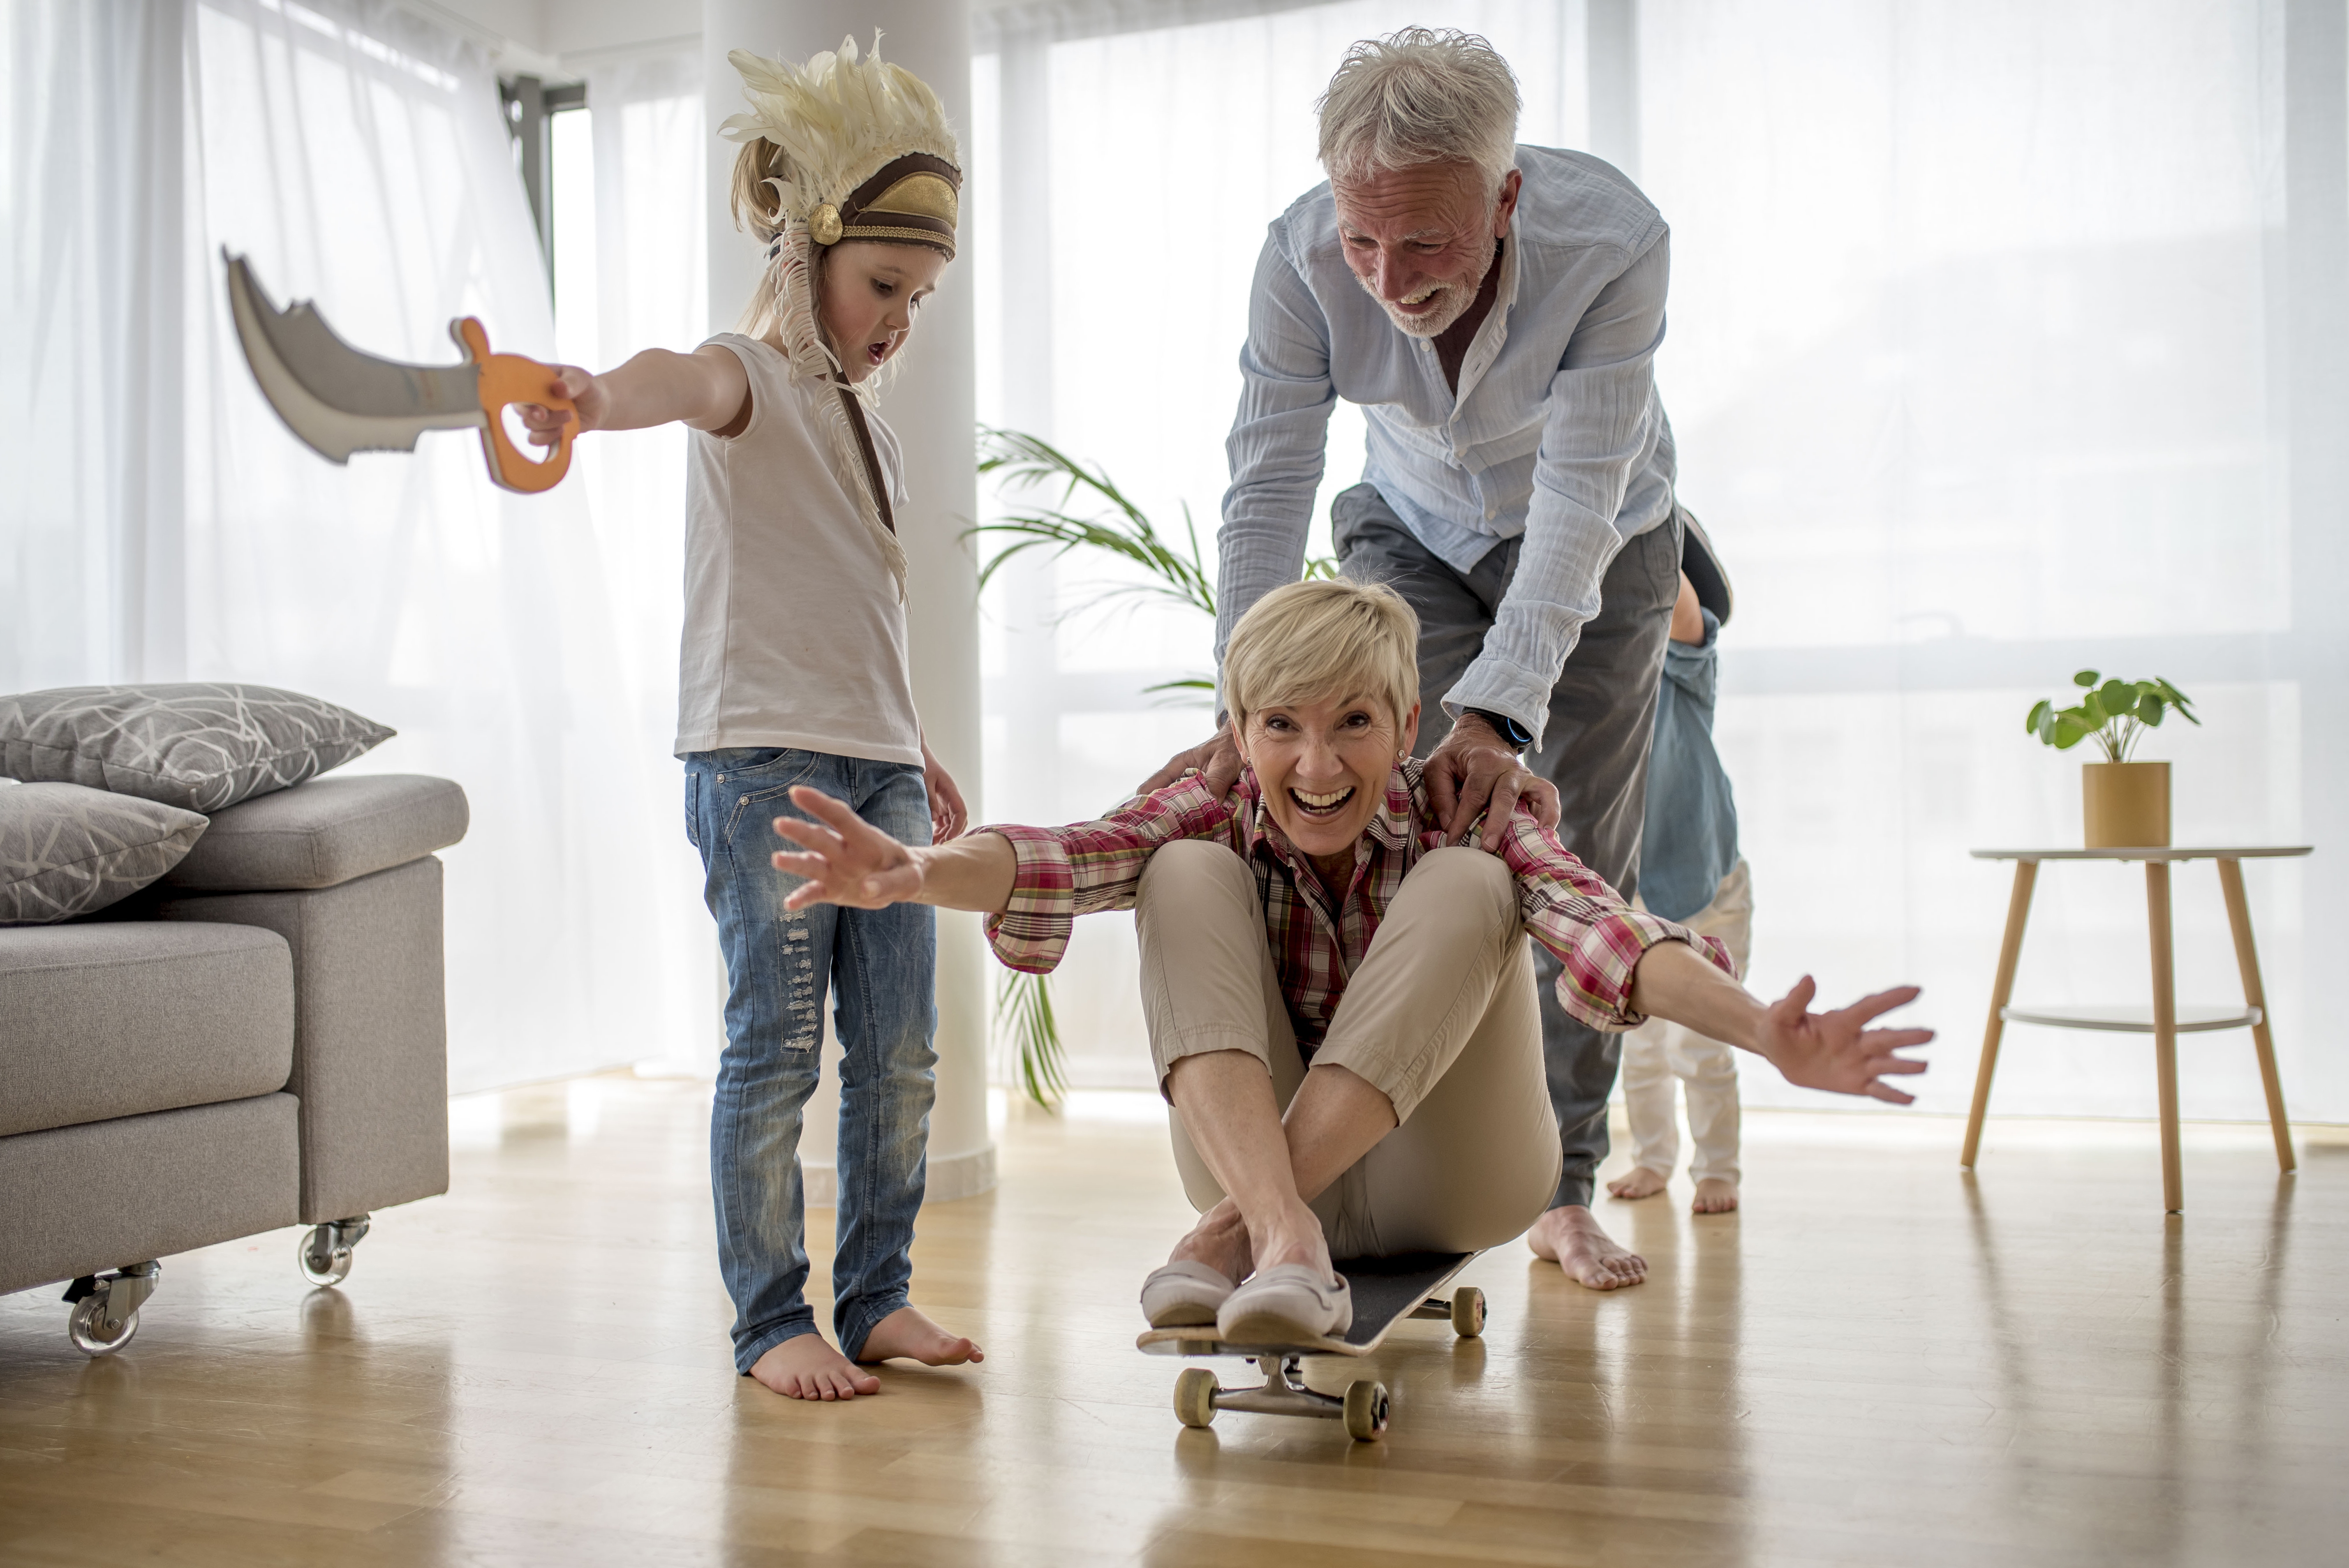 A grandmother sitting on a skateboard as her husband pushes her and her grandson watches | Source: Freepik